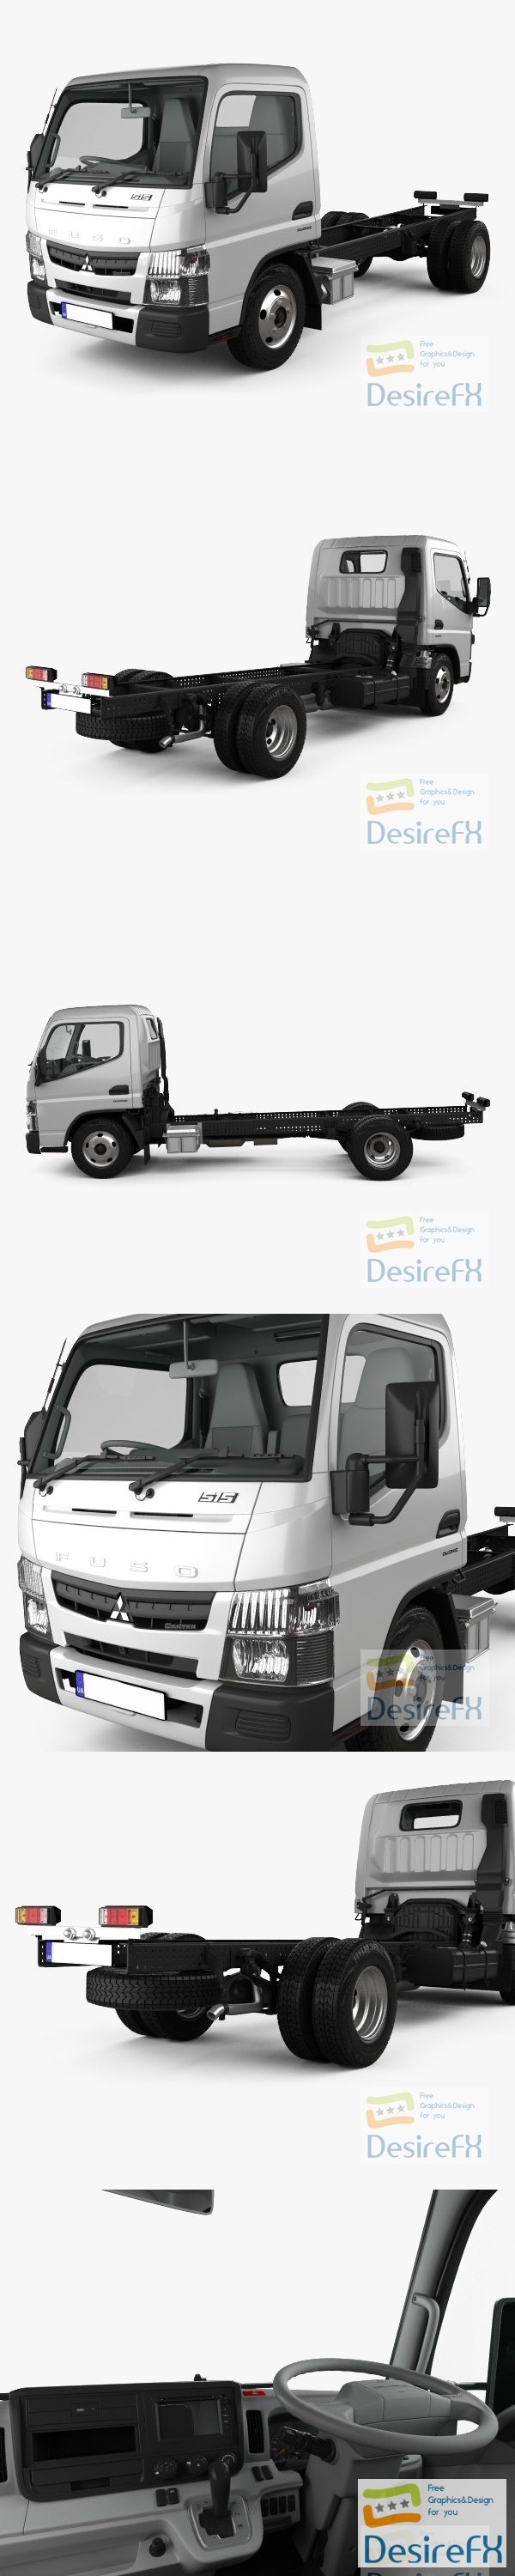 Mitsubishi Fuso Canter Super Low City Cab Chassis Truck with HQ interior 2019 3D Model